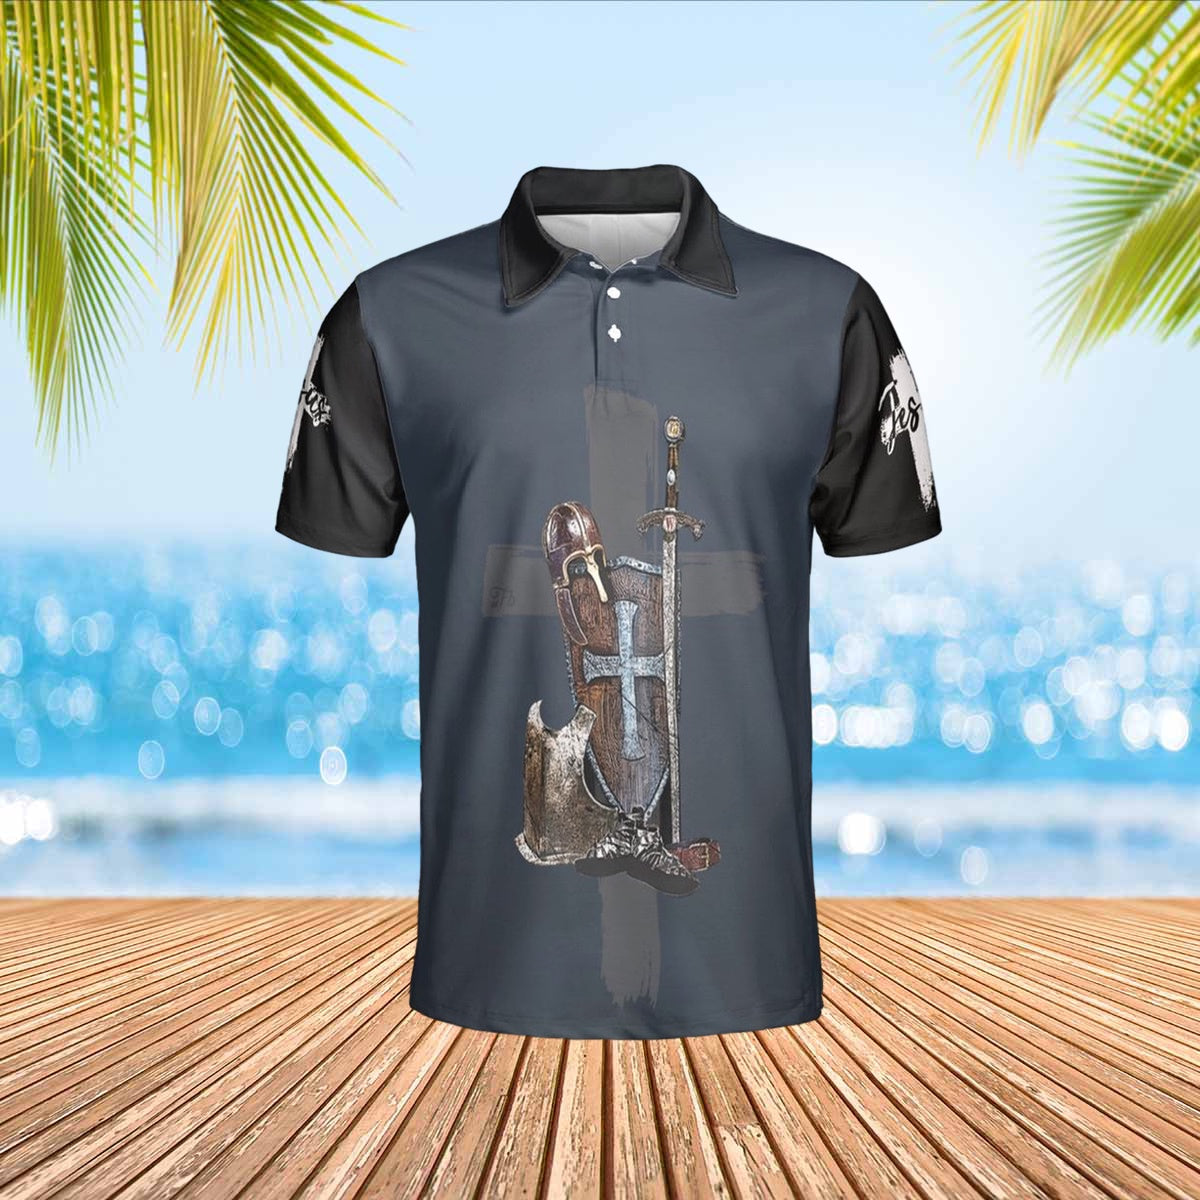 Put On The Full Armor Of God Jesus Polo Shirts - Christian Shirt For Men And Women